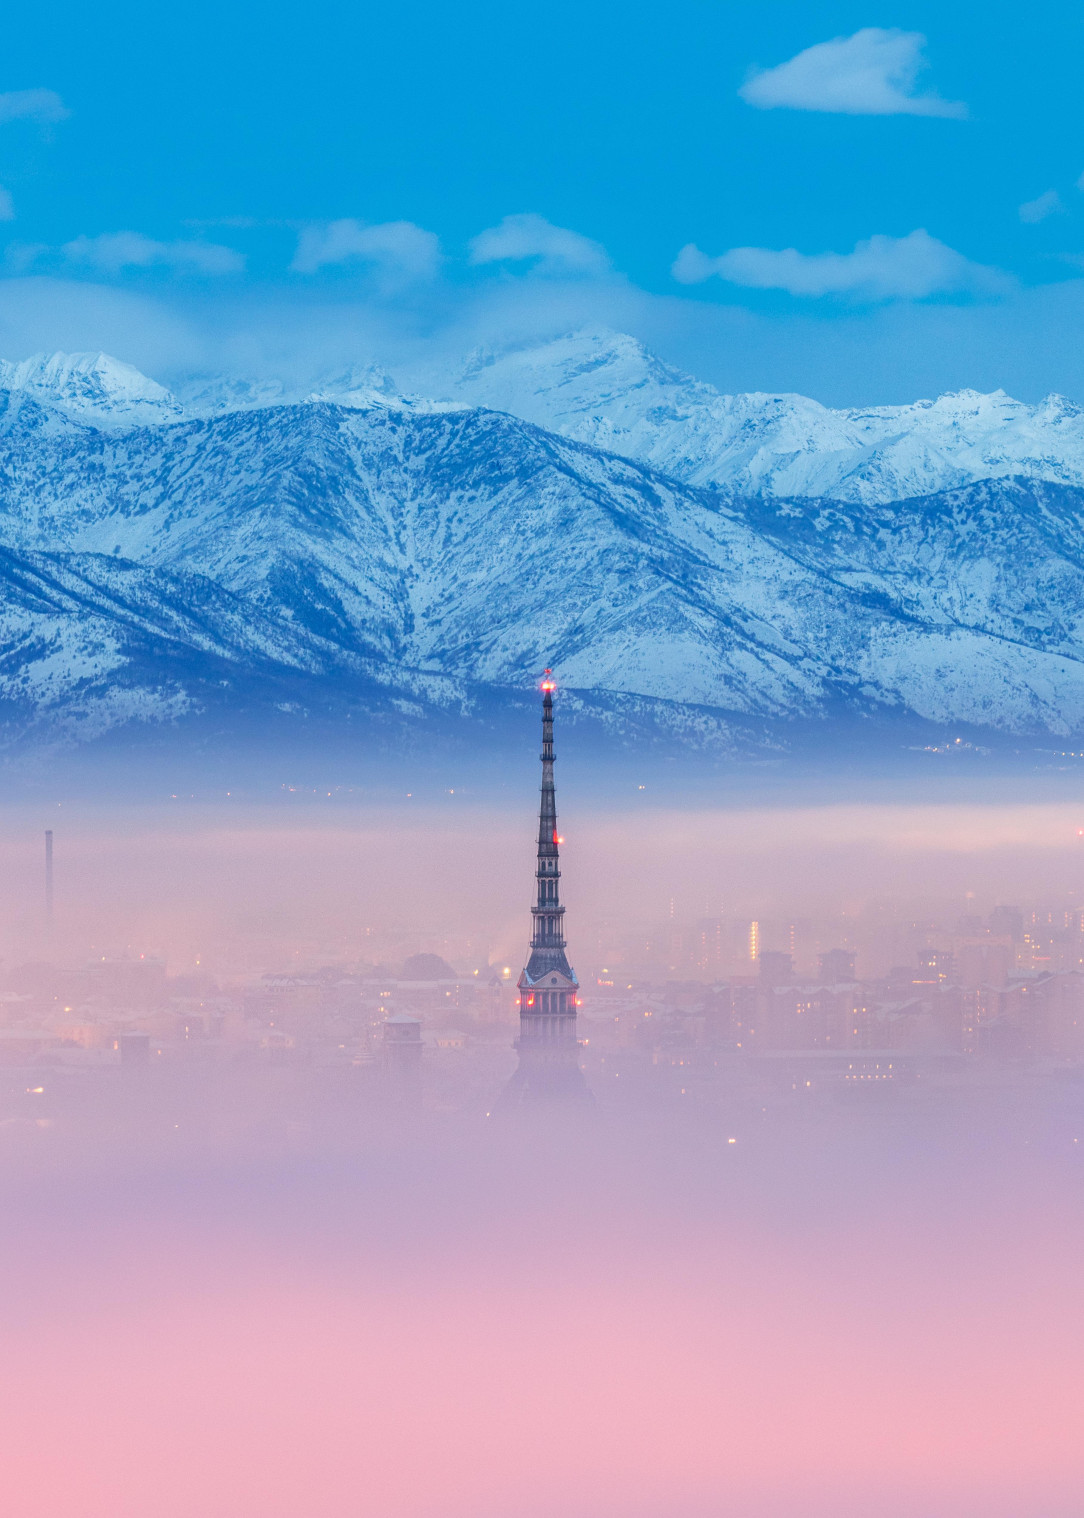 Turin&#039;s Mole Antonelliana poking out of the fog, Italy, December 2022